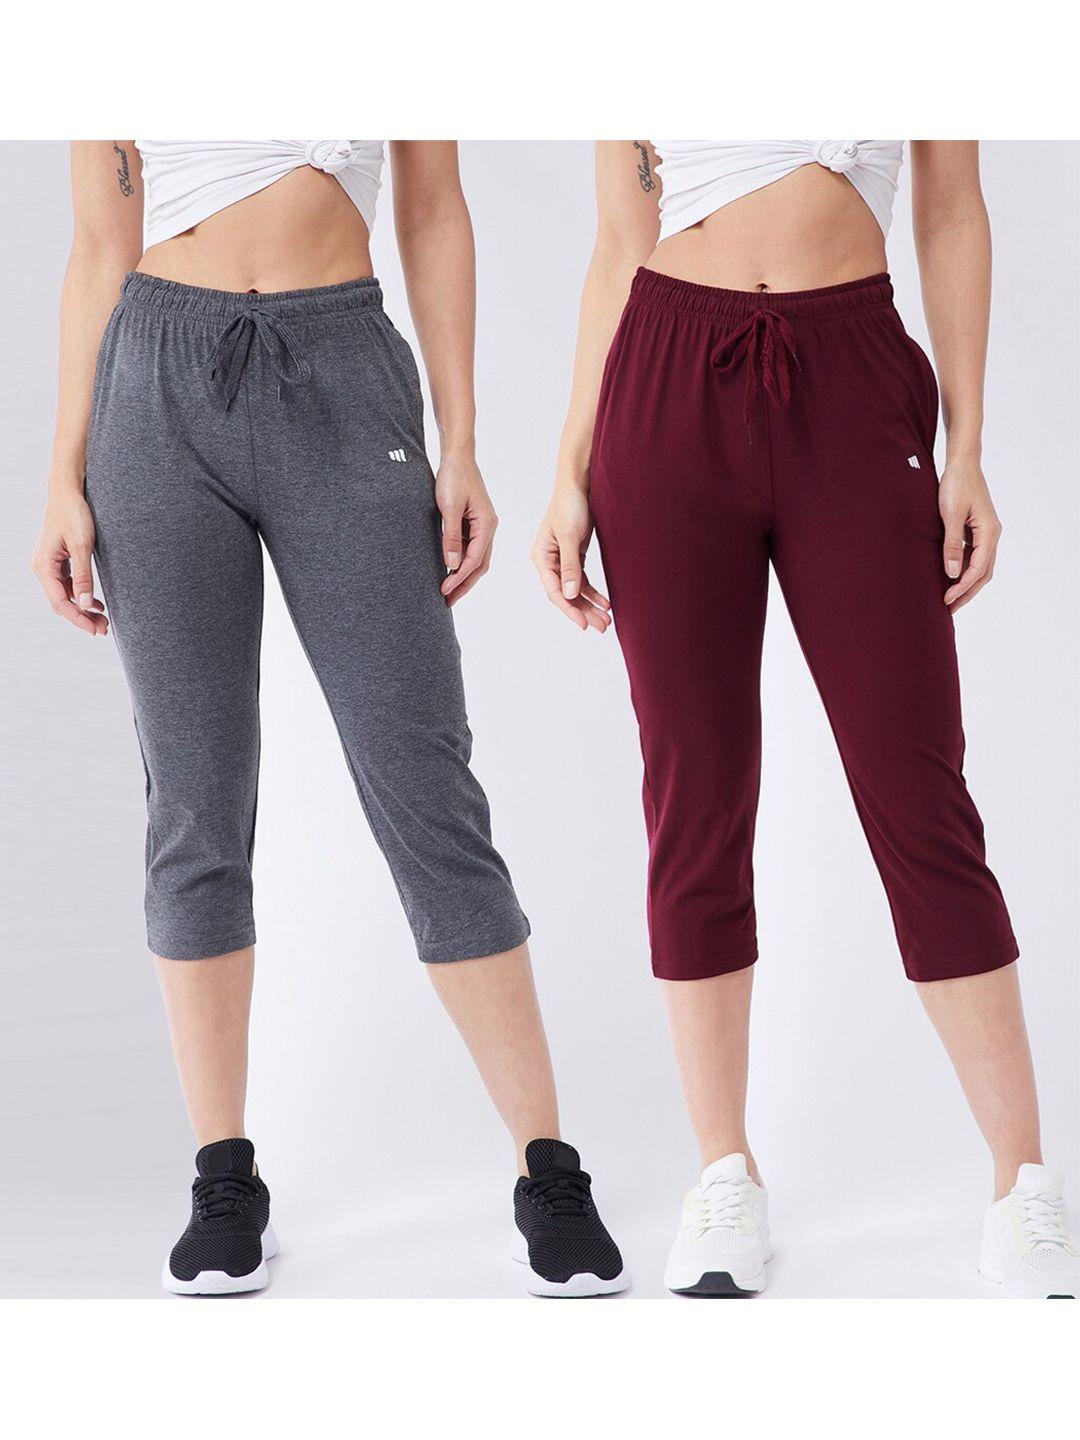 modeve women pack of 2 charcoal & burgundy solid cotton blend capris